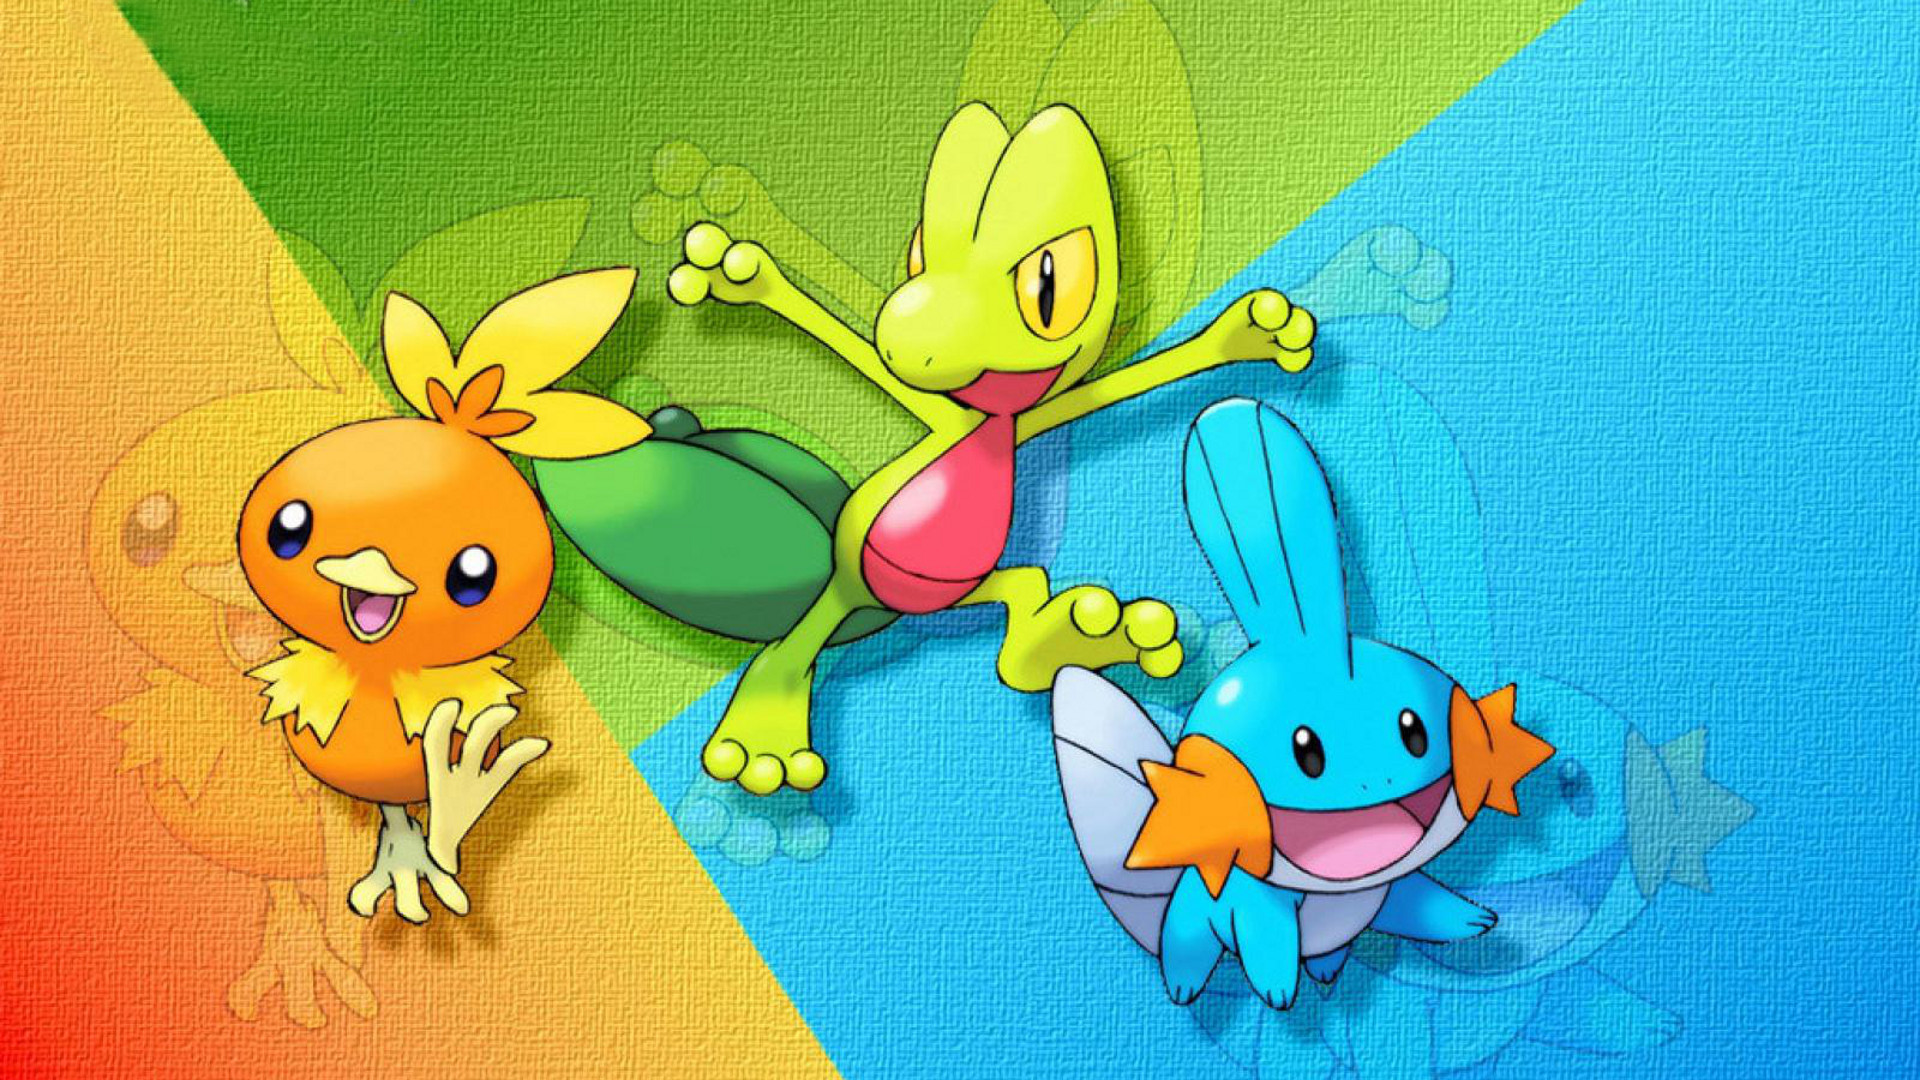 Video Game Pokémon: Ruby, Sapphire, and Emerald HD Wallpaper | Background Image